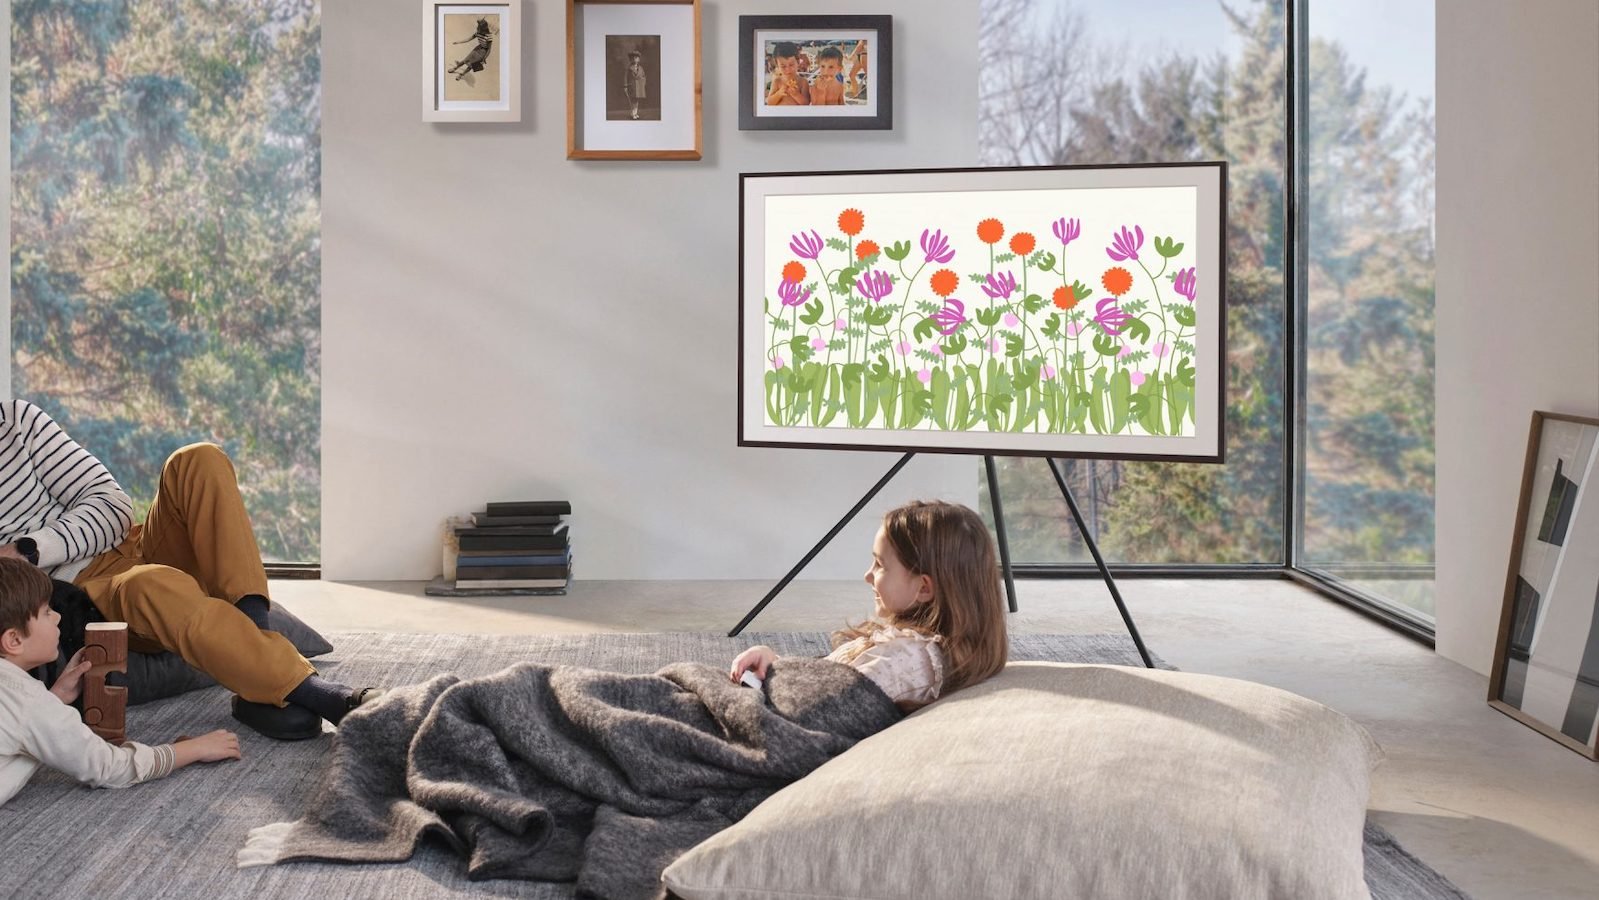 Samsung The Frame 2021 lifestyle TV transforms your television into a work of art